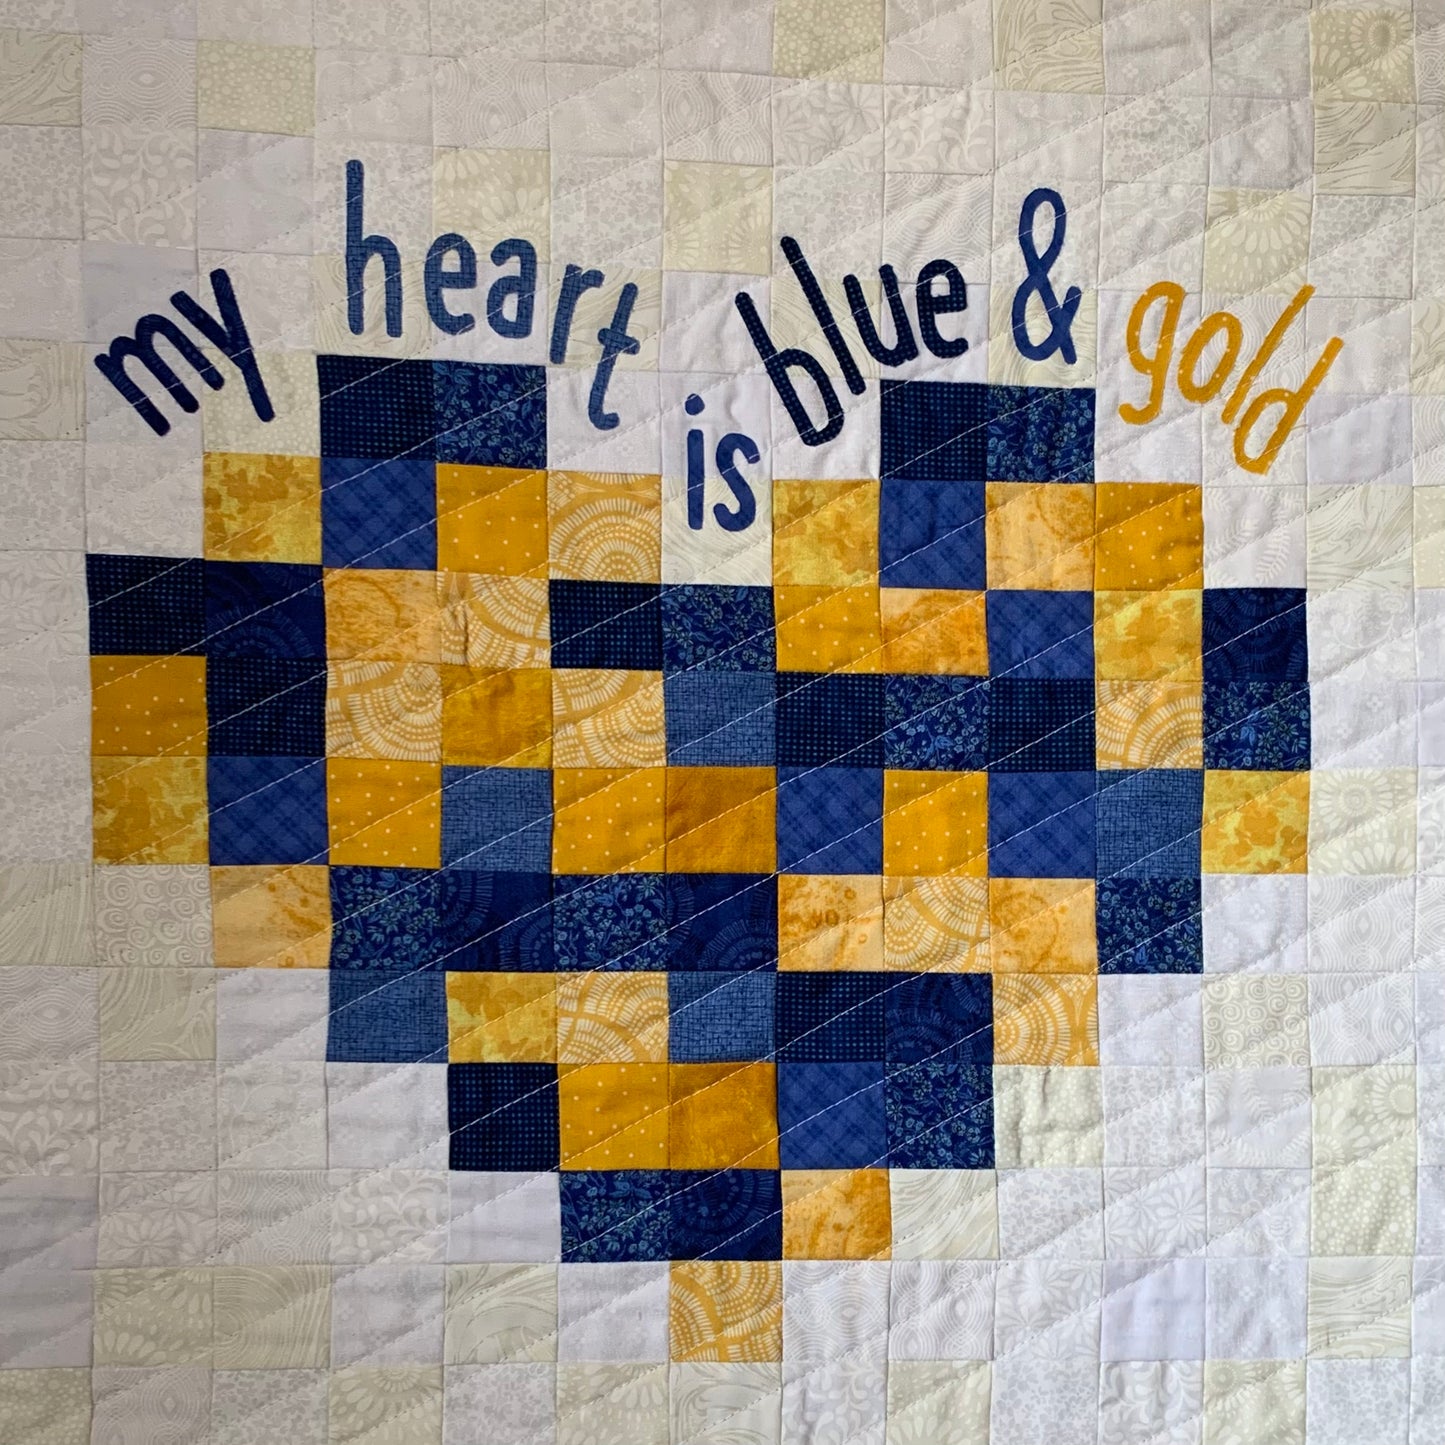 My Heart is Blue & Gold